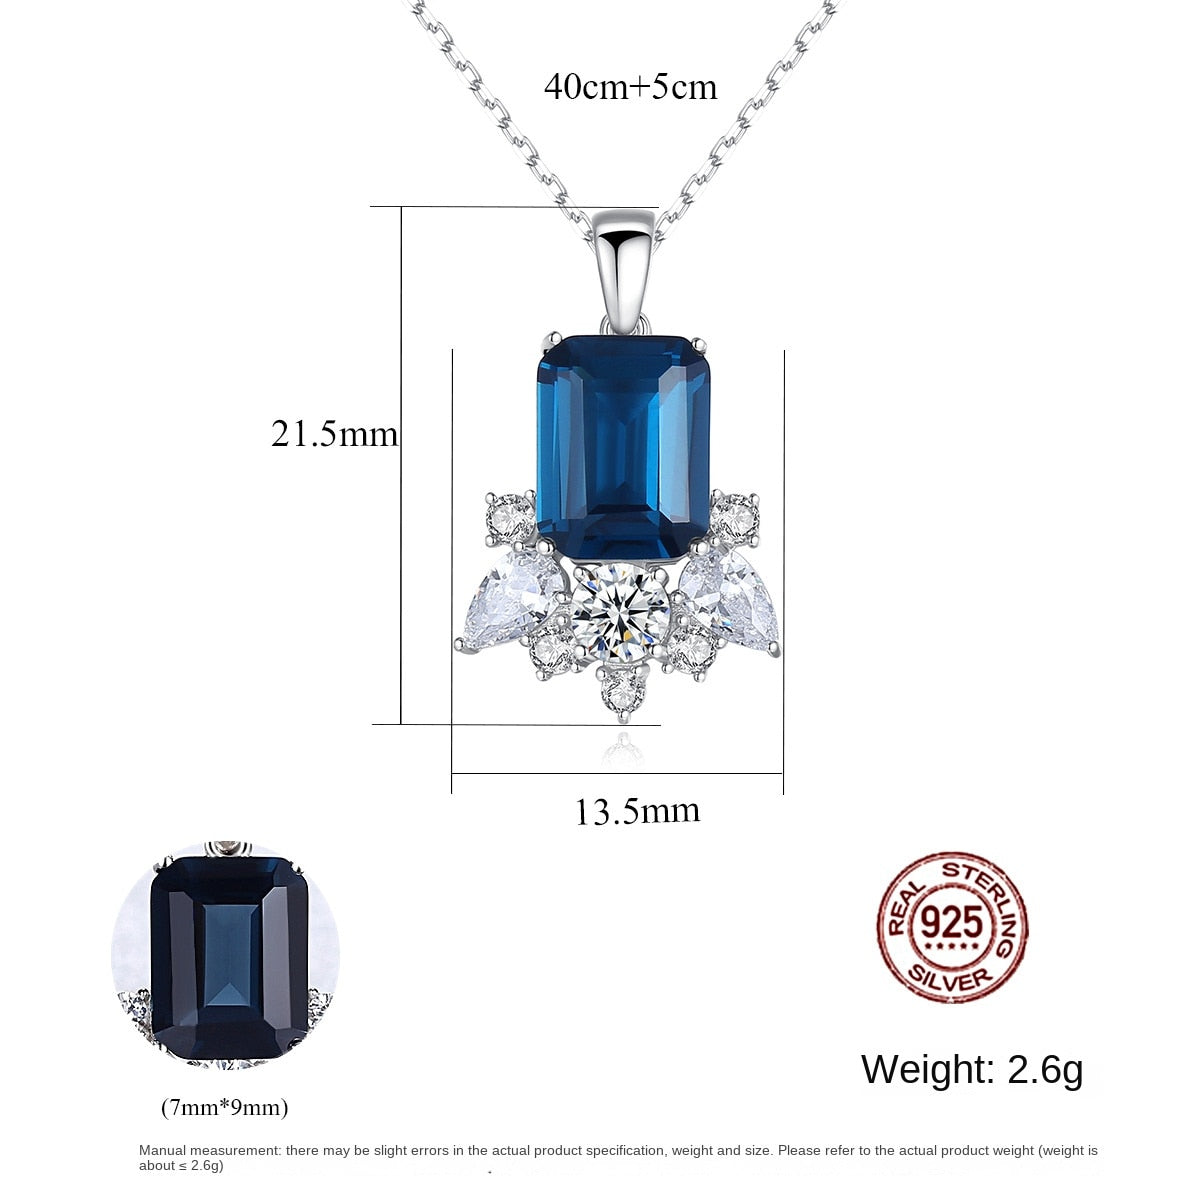 Gemstonely- Trendy and Fashionable: 925 Silver Necklace with Synthetic Gemstone Pendant on Lock Chain